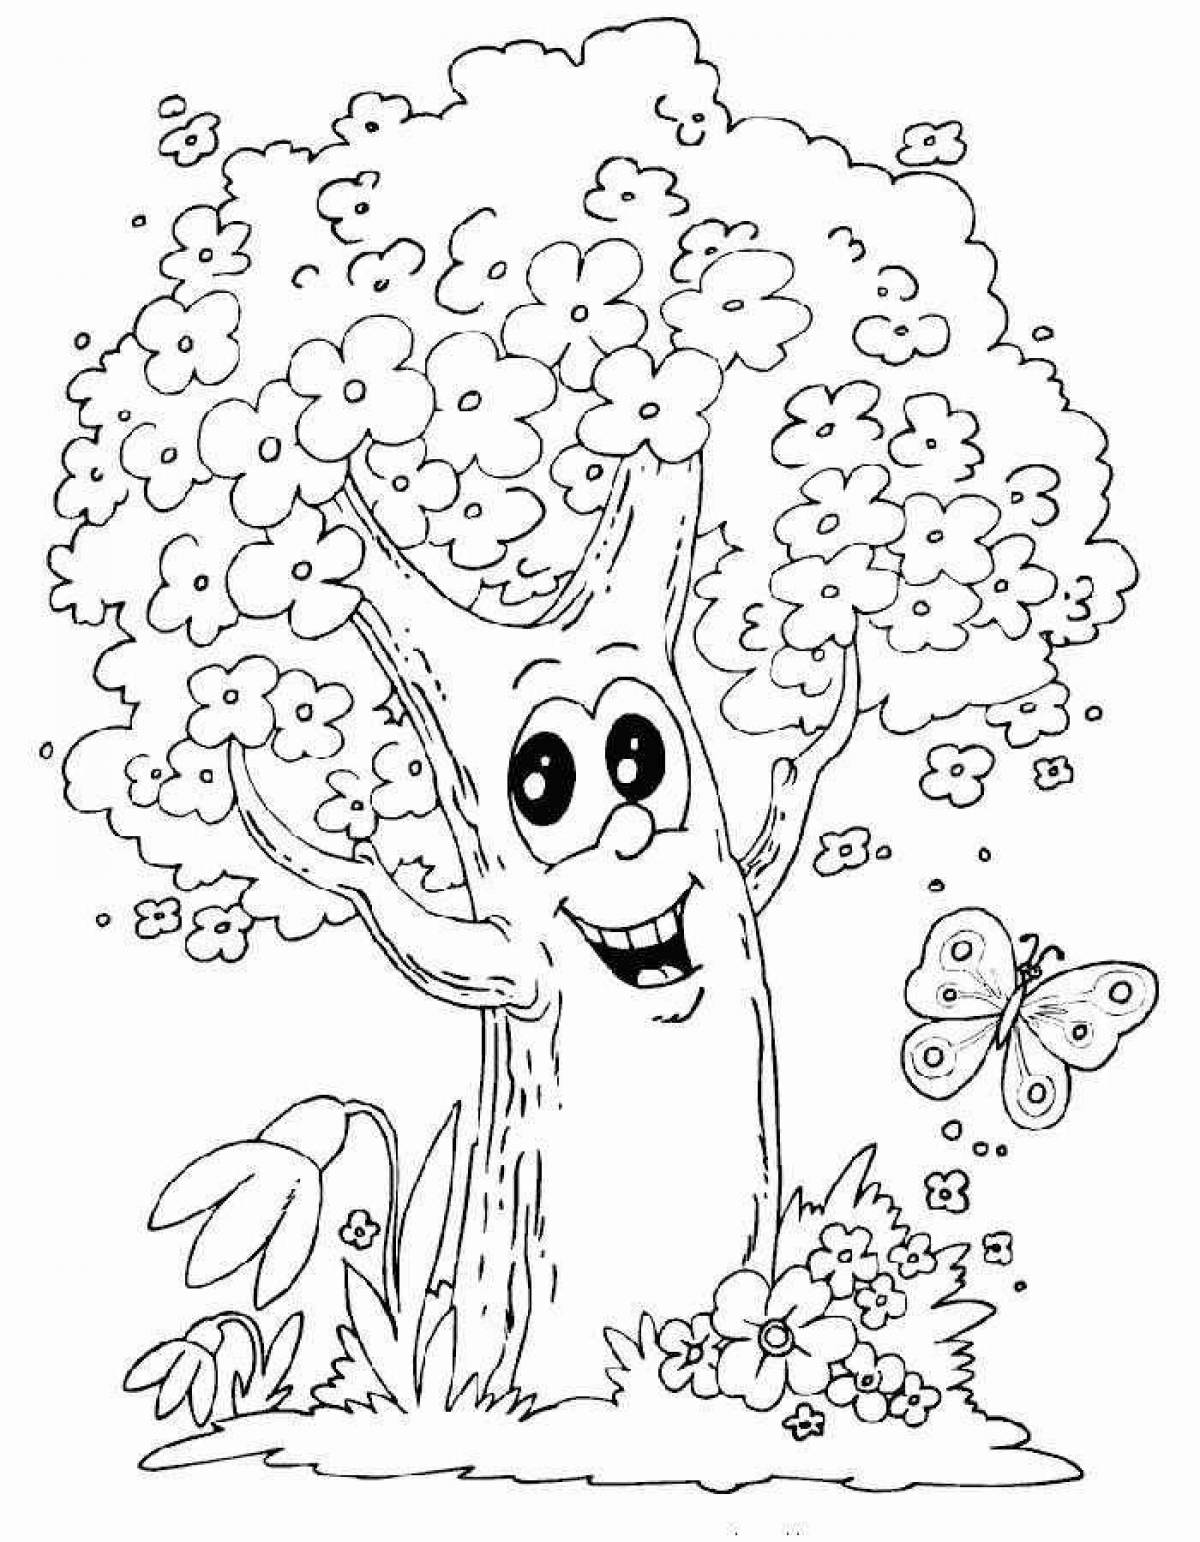 Adorable tree coloring book for kids